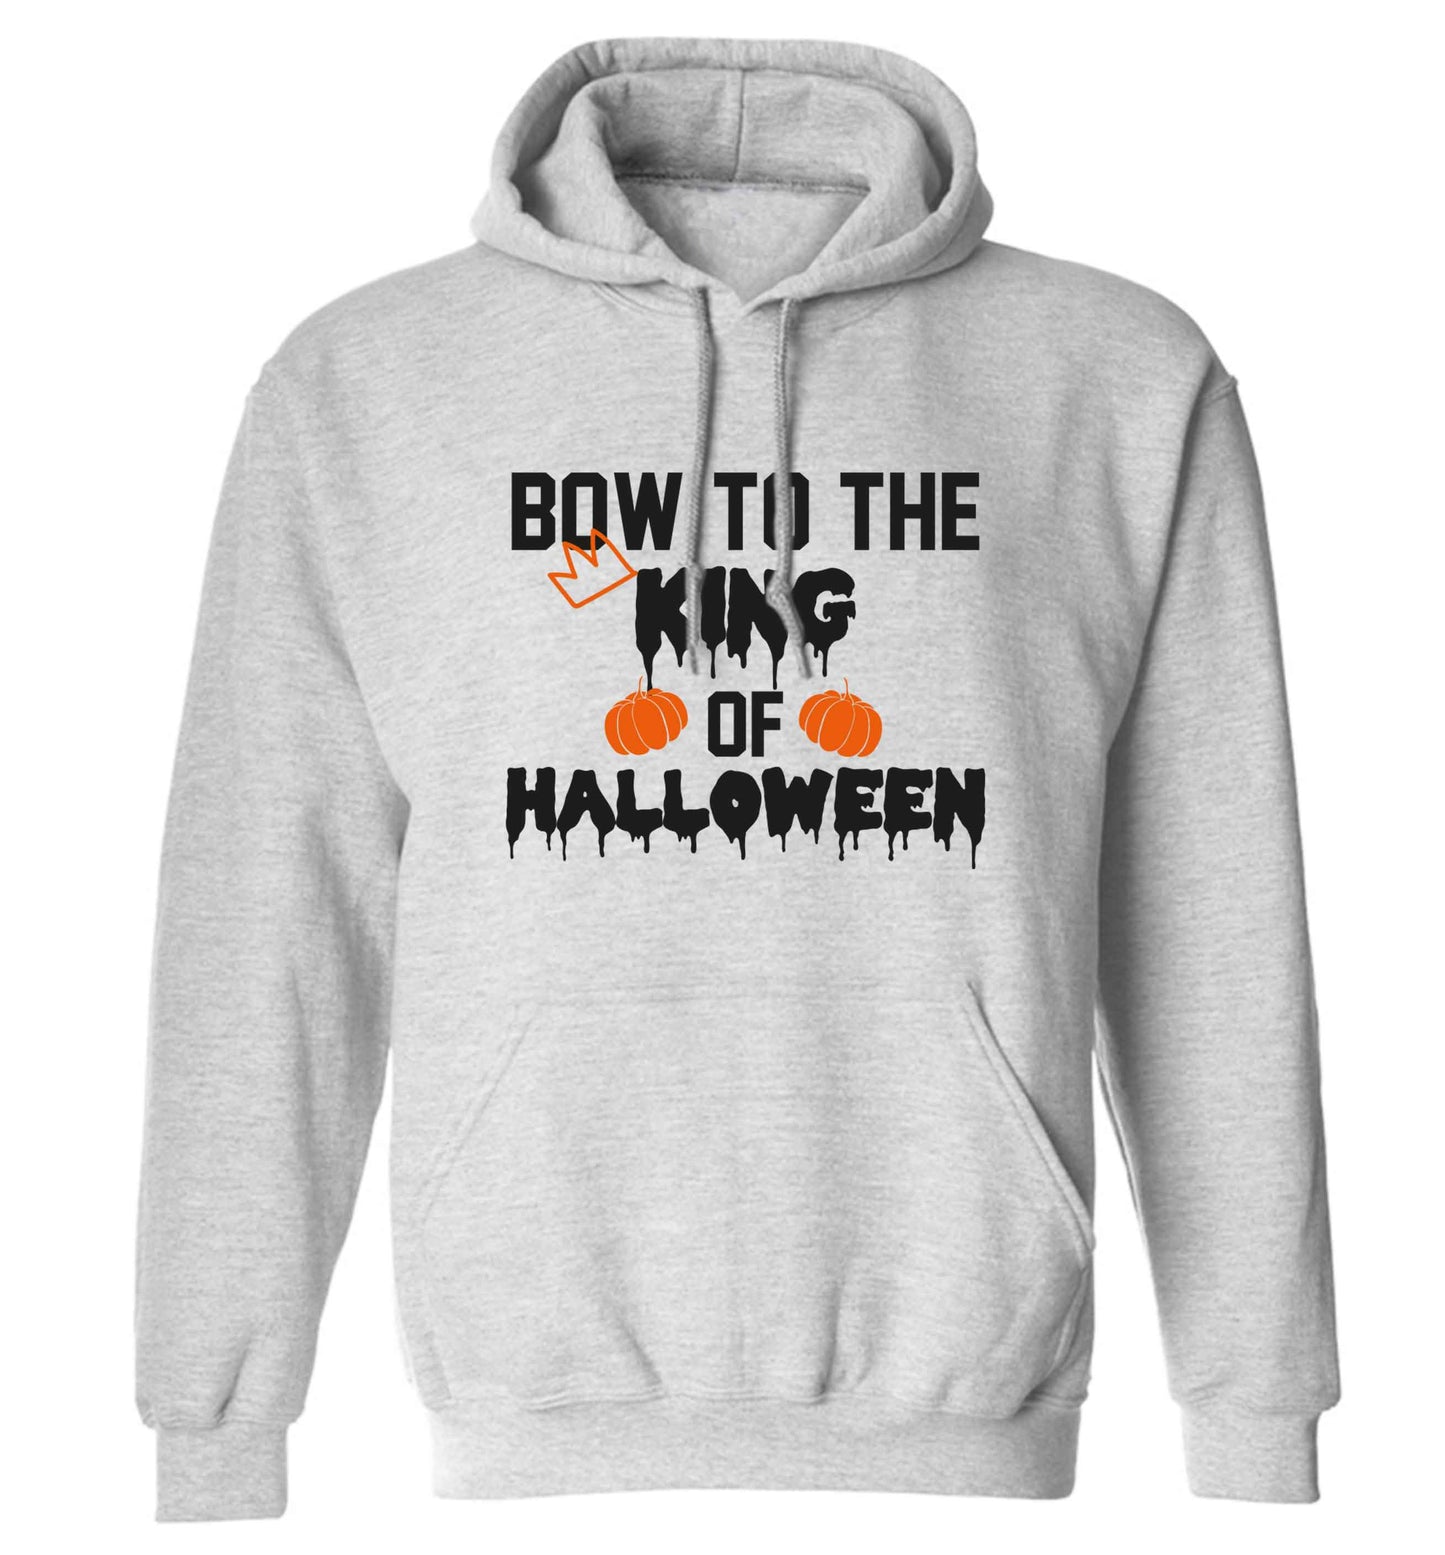 Bow to the King of halloween adults unisex grey hoodie 2XL